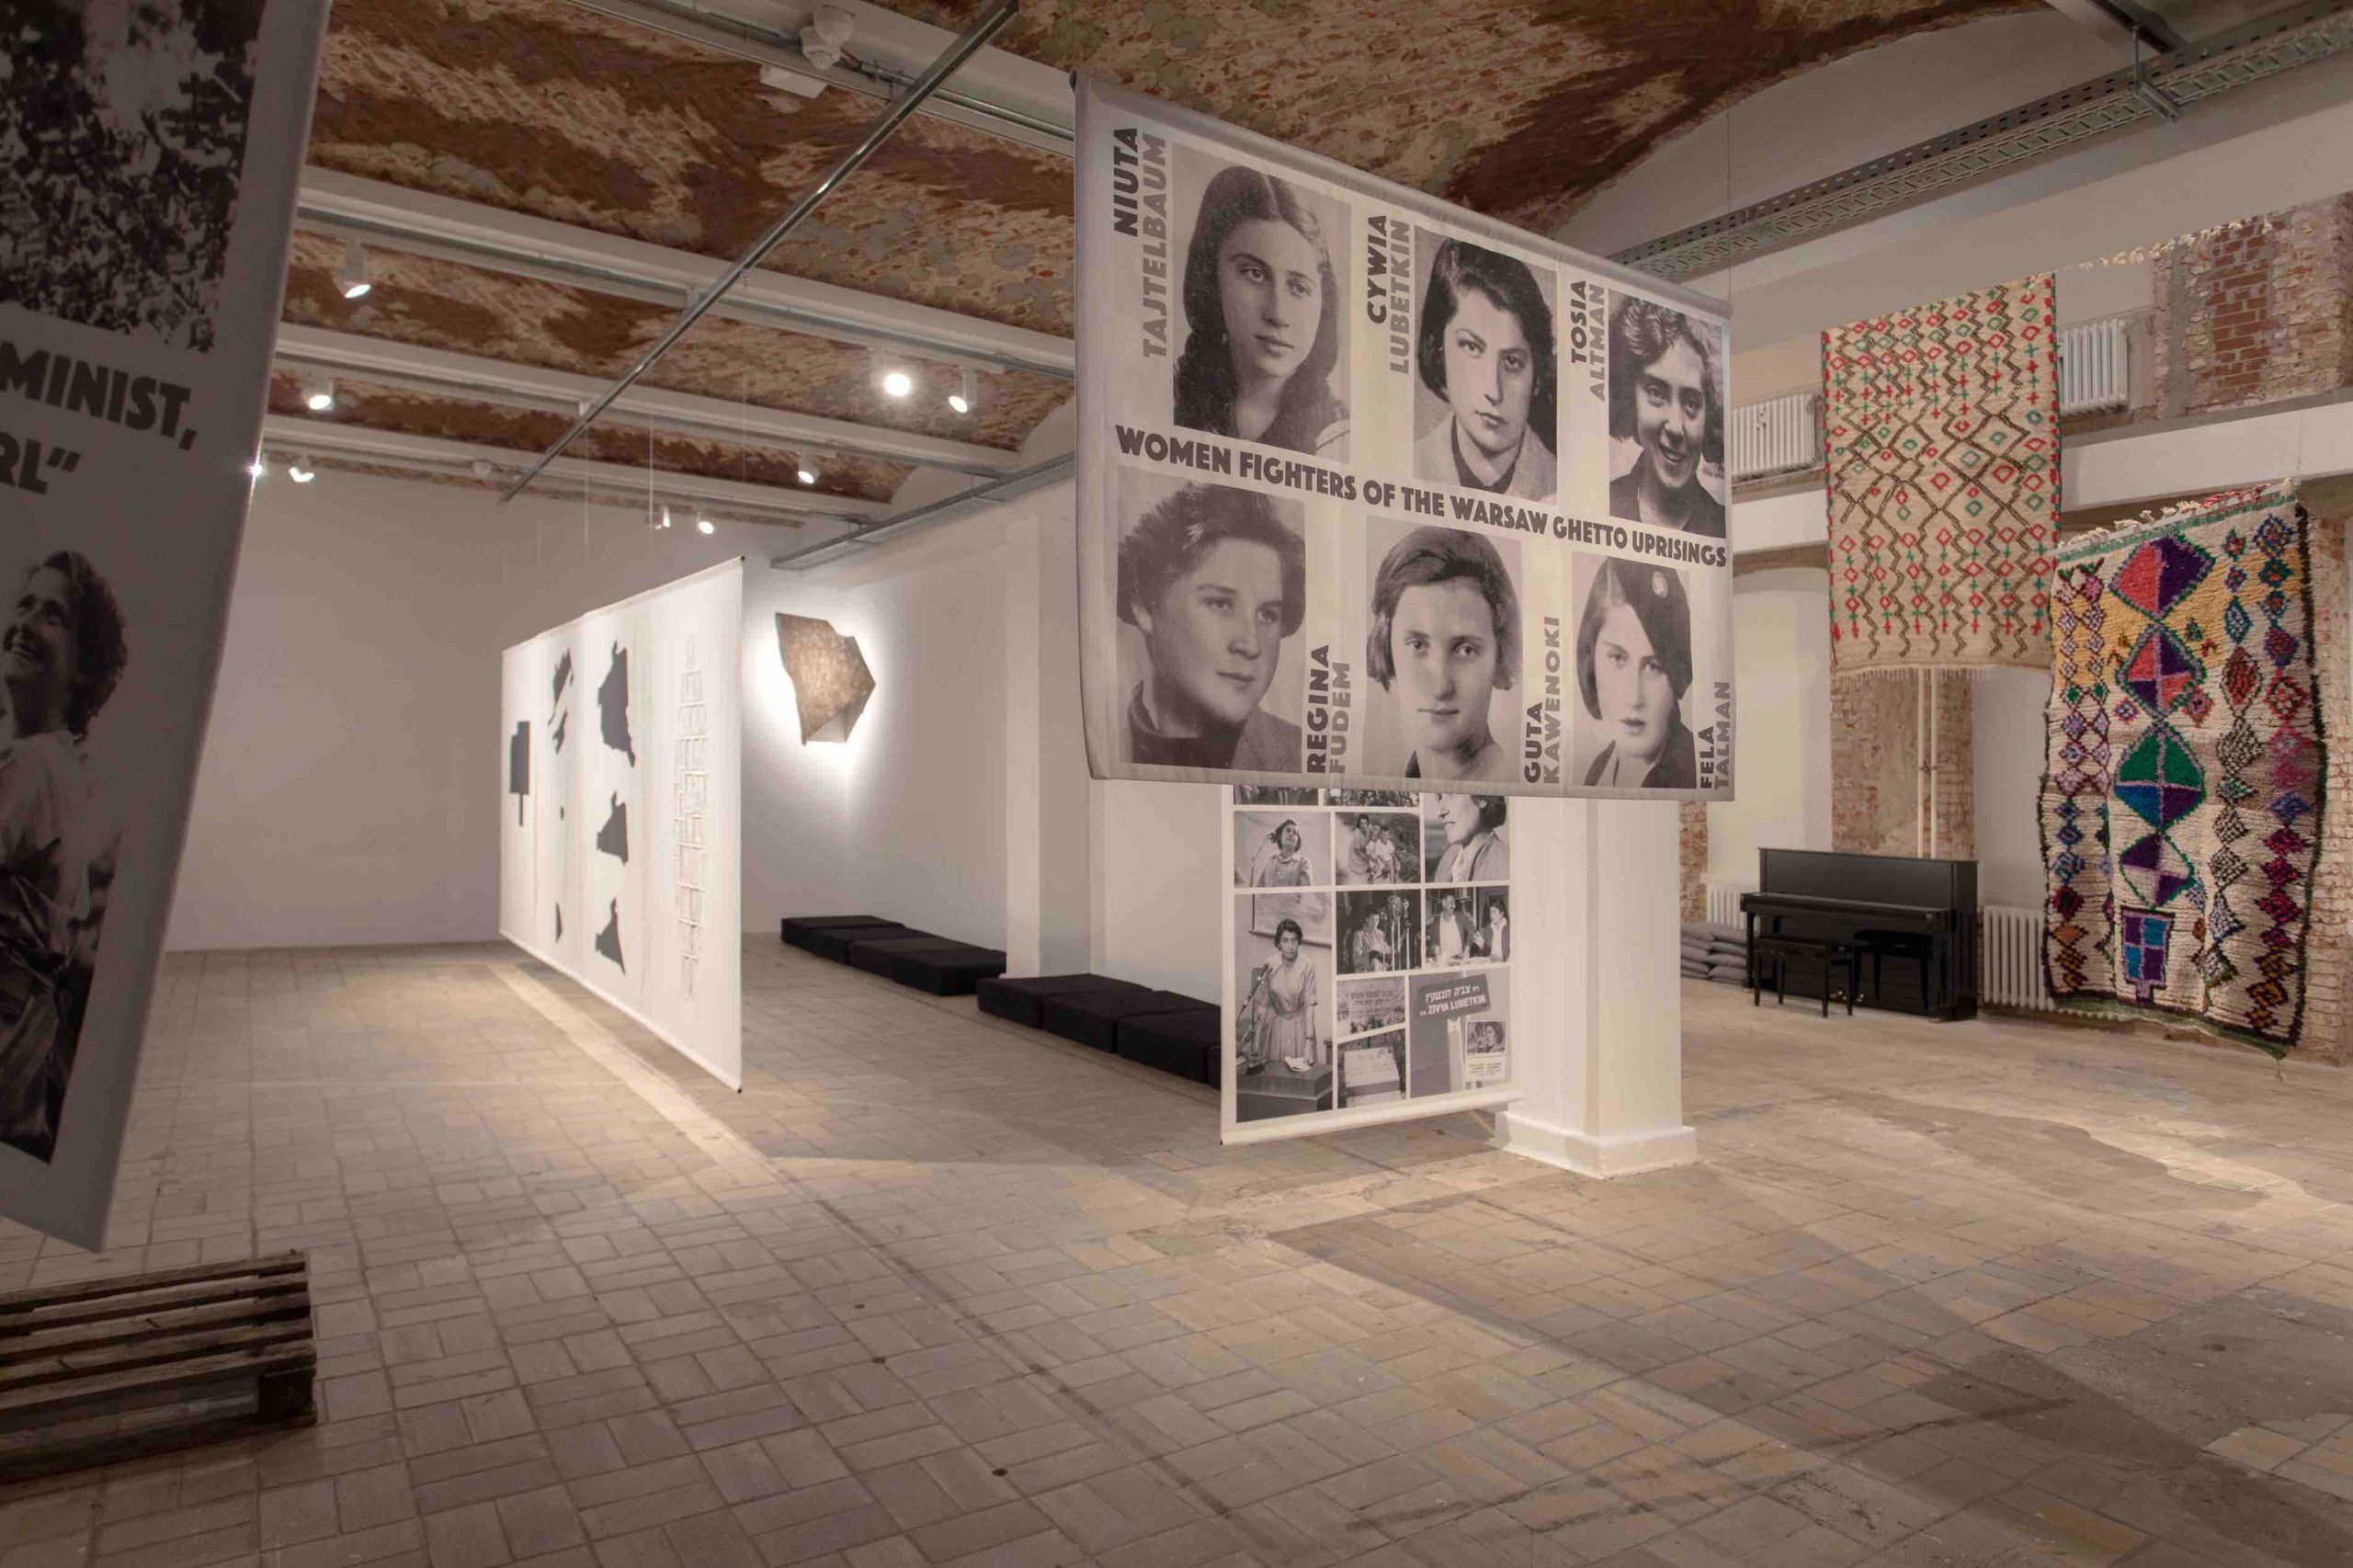 Myriam El Haïk, Zuzanna Hertzberg, installation view, 12th Berlin Biennale, KW Institute for Contemporary Art, 11.6.–18.9.2022

Photo: Silke Briel

 

From left to right:

 

Zuzanna Hertzberg, Mechitza. Individual and Organized Resistance of Women During the Holocaust, 2019-22

5 textile banners with photo prints; performative activation

 

Myriam El Haïk, Please Patterns, 2022

Installation and performance for drawings, rugs, and piano